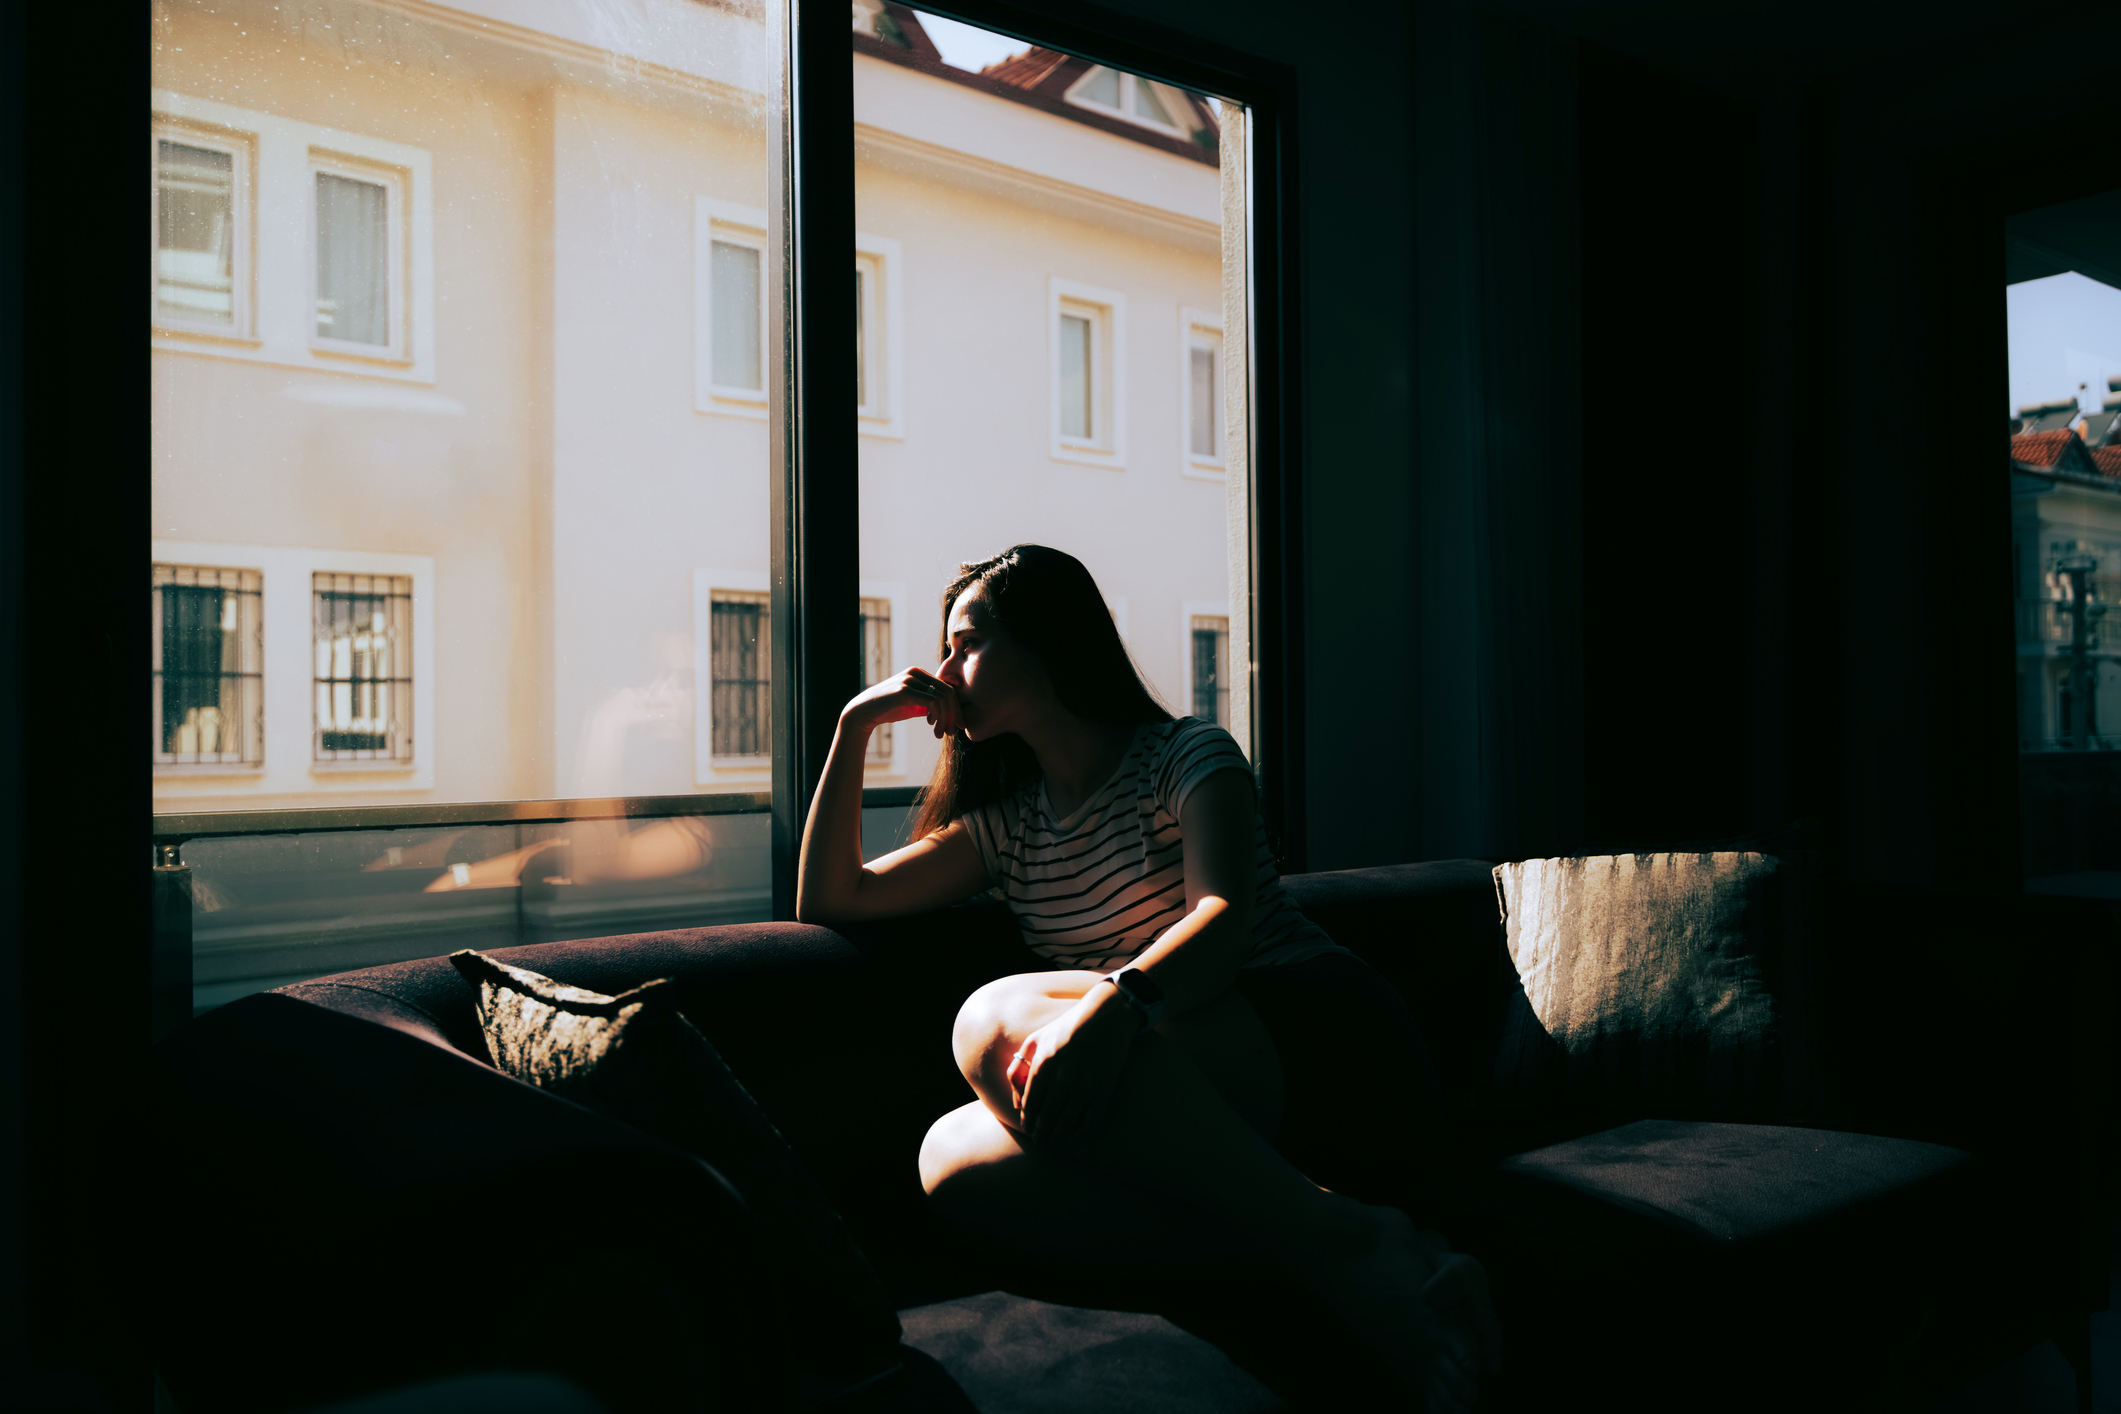 Person sitting by a window in a contemplative pose, sunlight casting shadows indoors